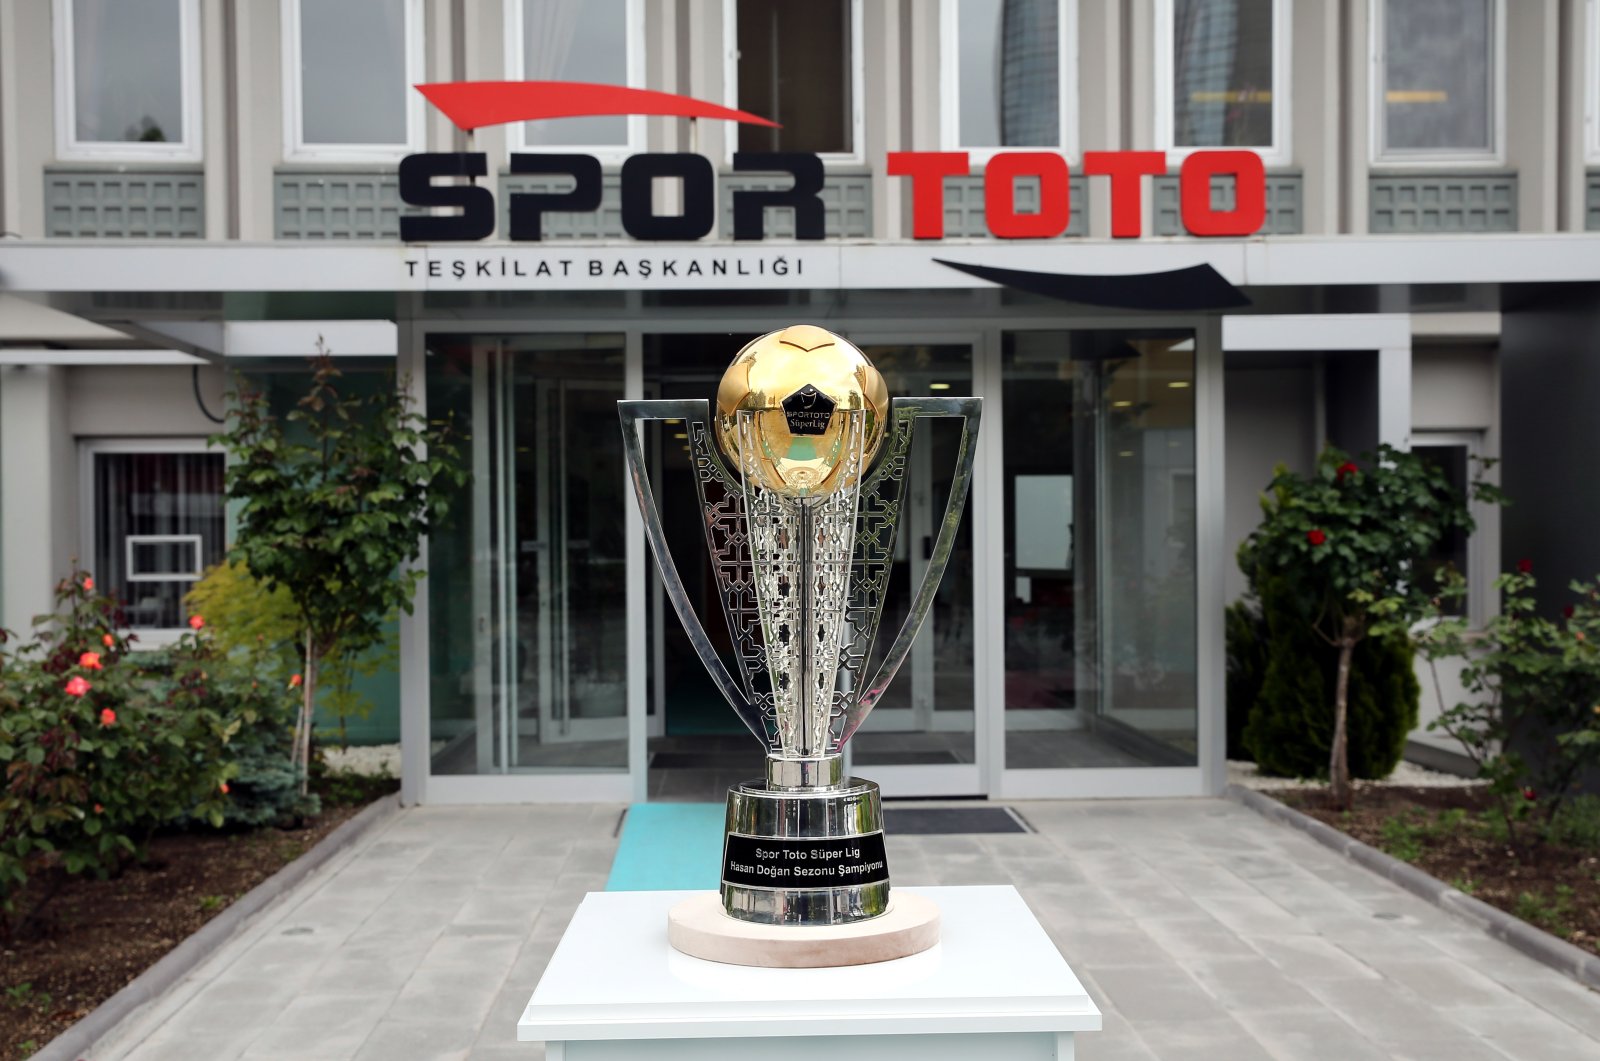 The Süper Lig trophy is seen in front of the Spor Toto headquarters, Ankara, Turkey, May 13, 2016. (AA Photo)